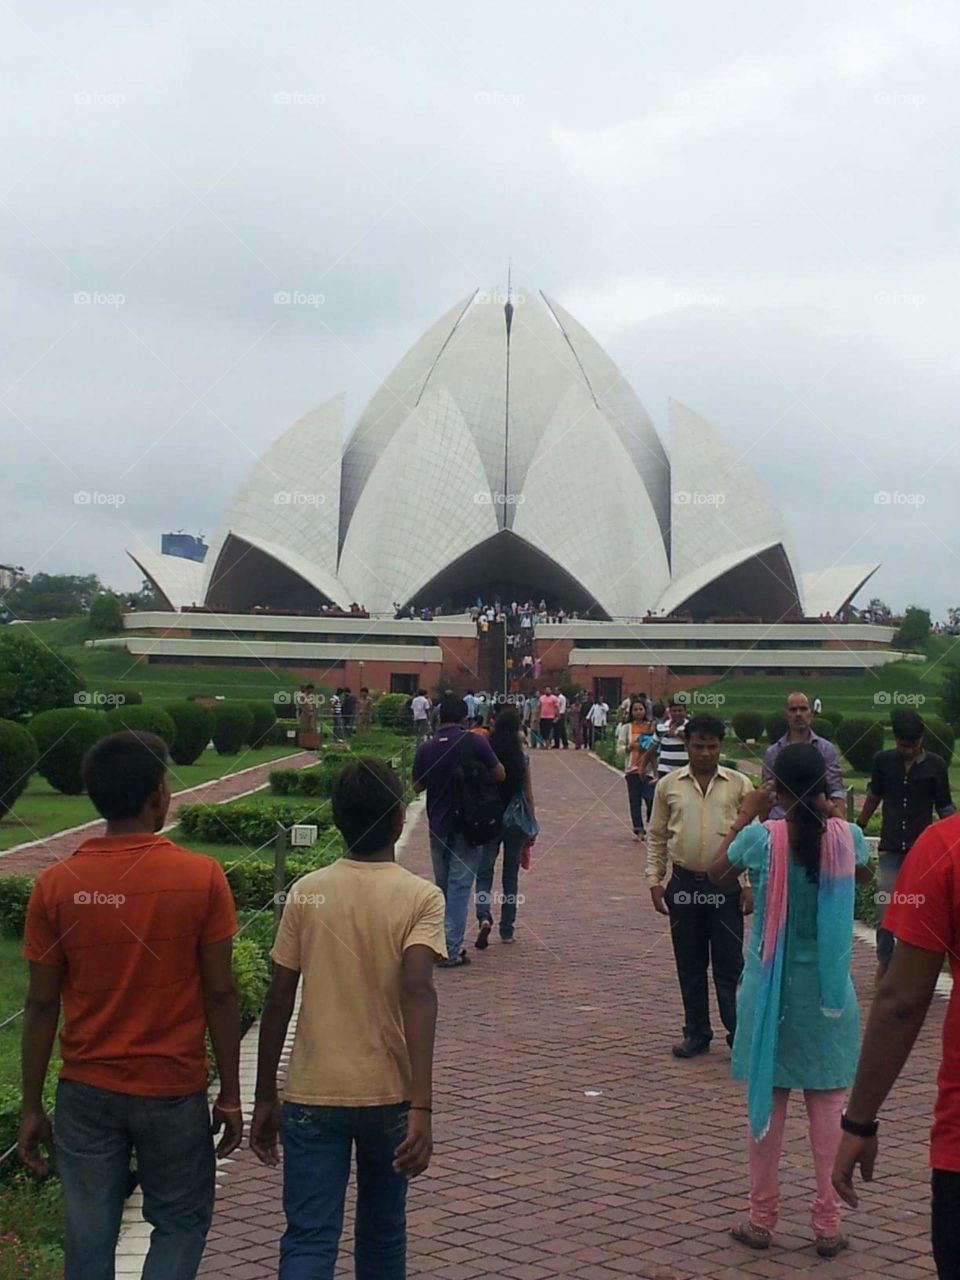 The Lotus Temple, located in Delhi, India, is a Bahá'í House of Worship that was dedicated in December 1986, costing $10
 East of Nehru place, this temple is built in the shape of a lotus flower.